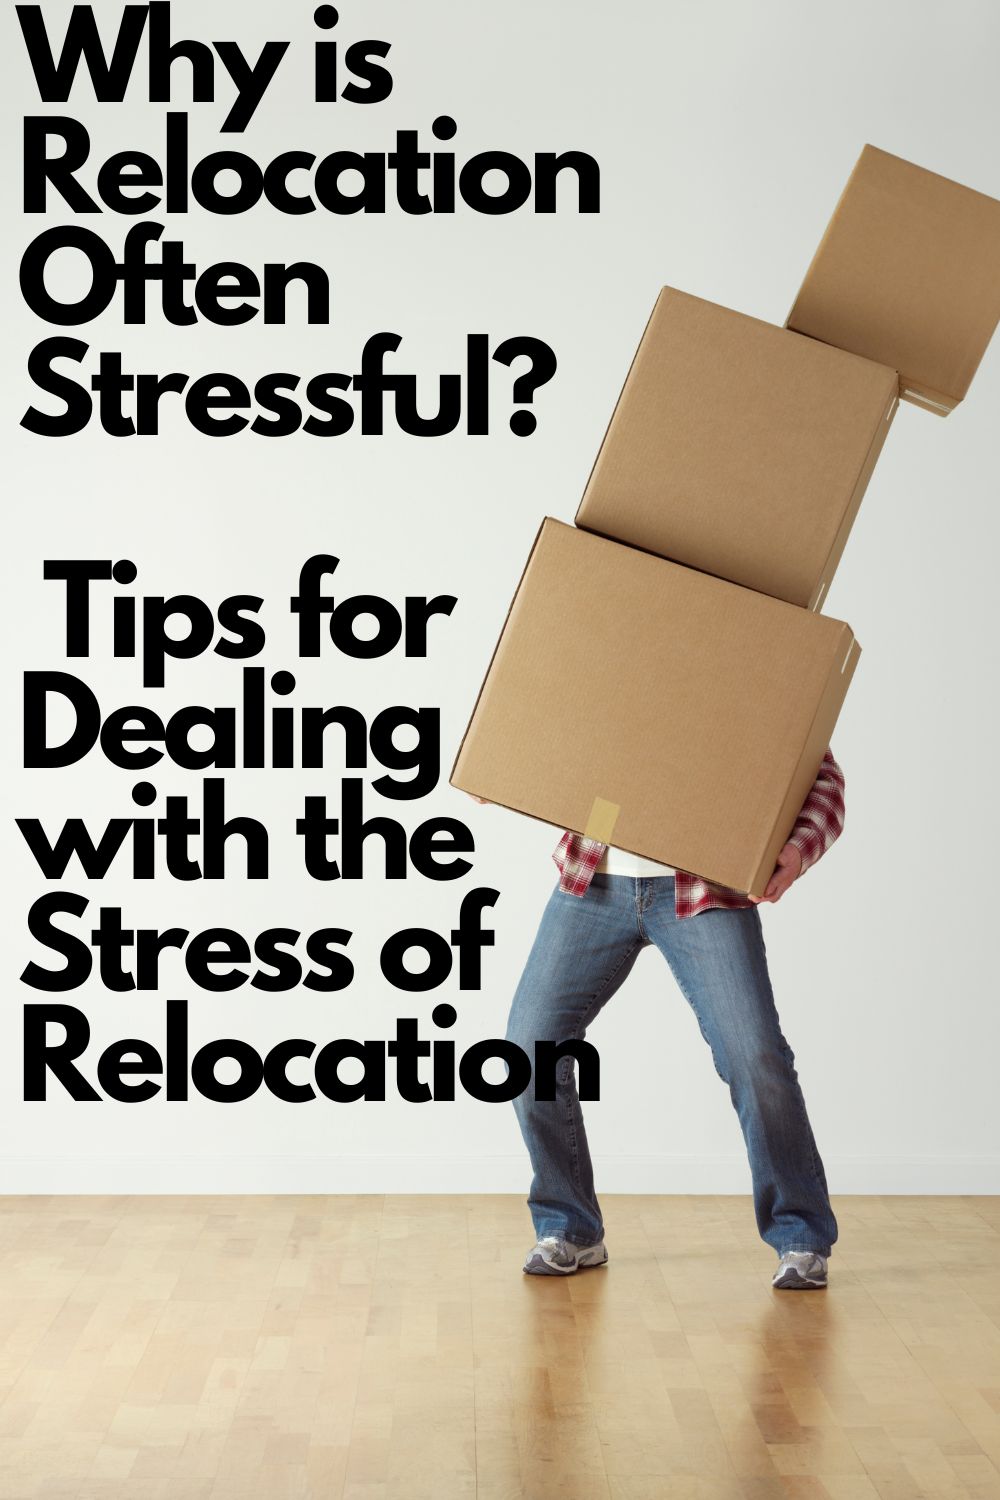 Why is Relocation Often Stressful? Tips for Dealing with the Stress of Relocation